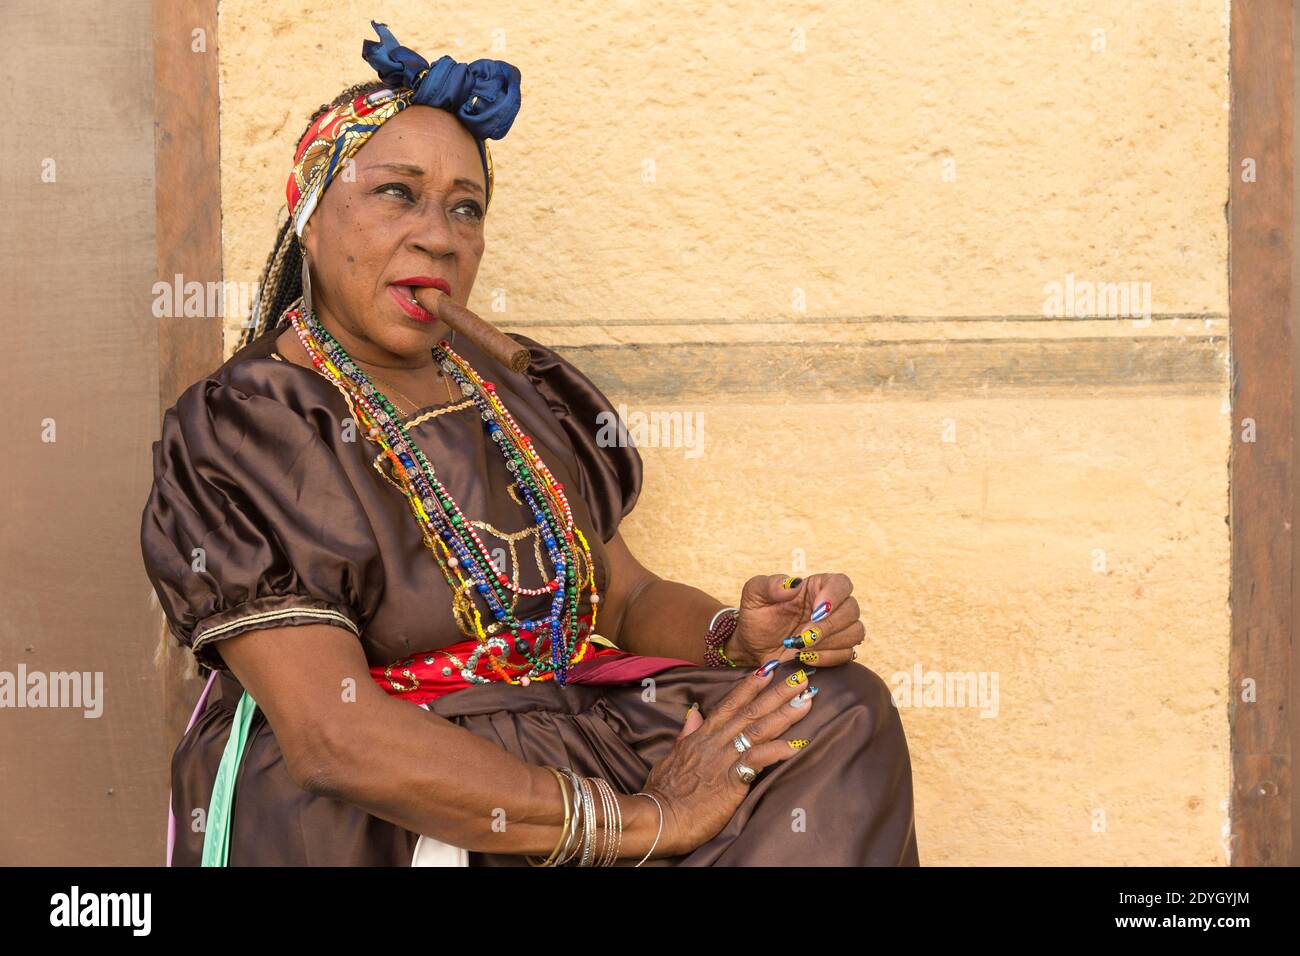 Lady In Traditional Dress Smoking A Cigar In Old Havana Stock Photo